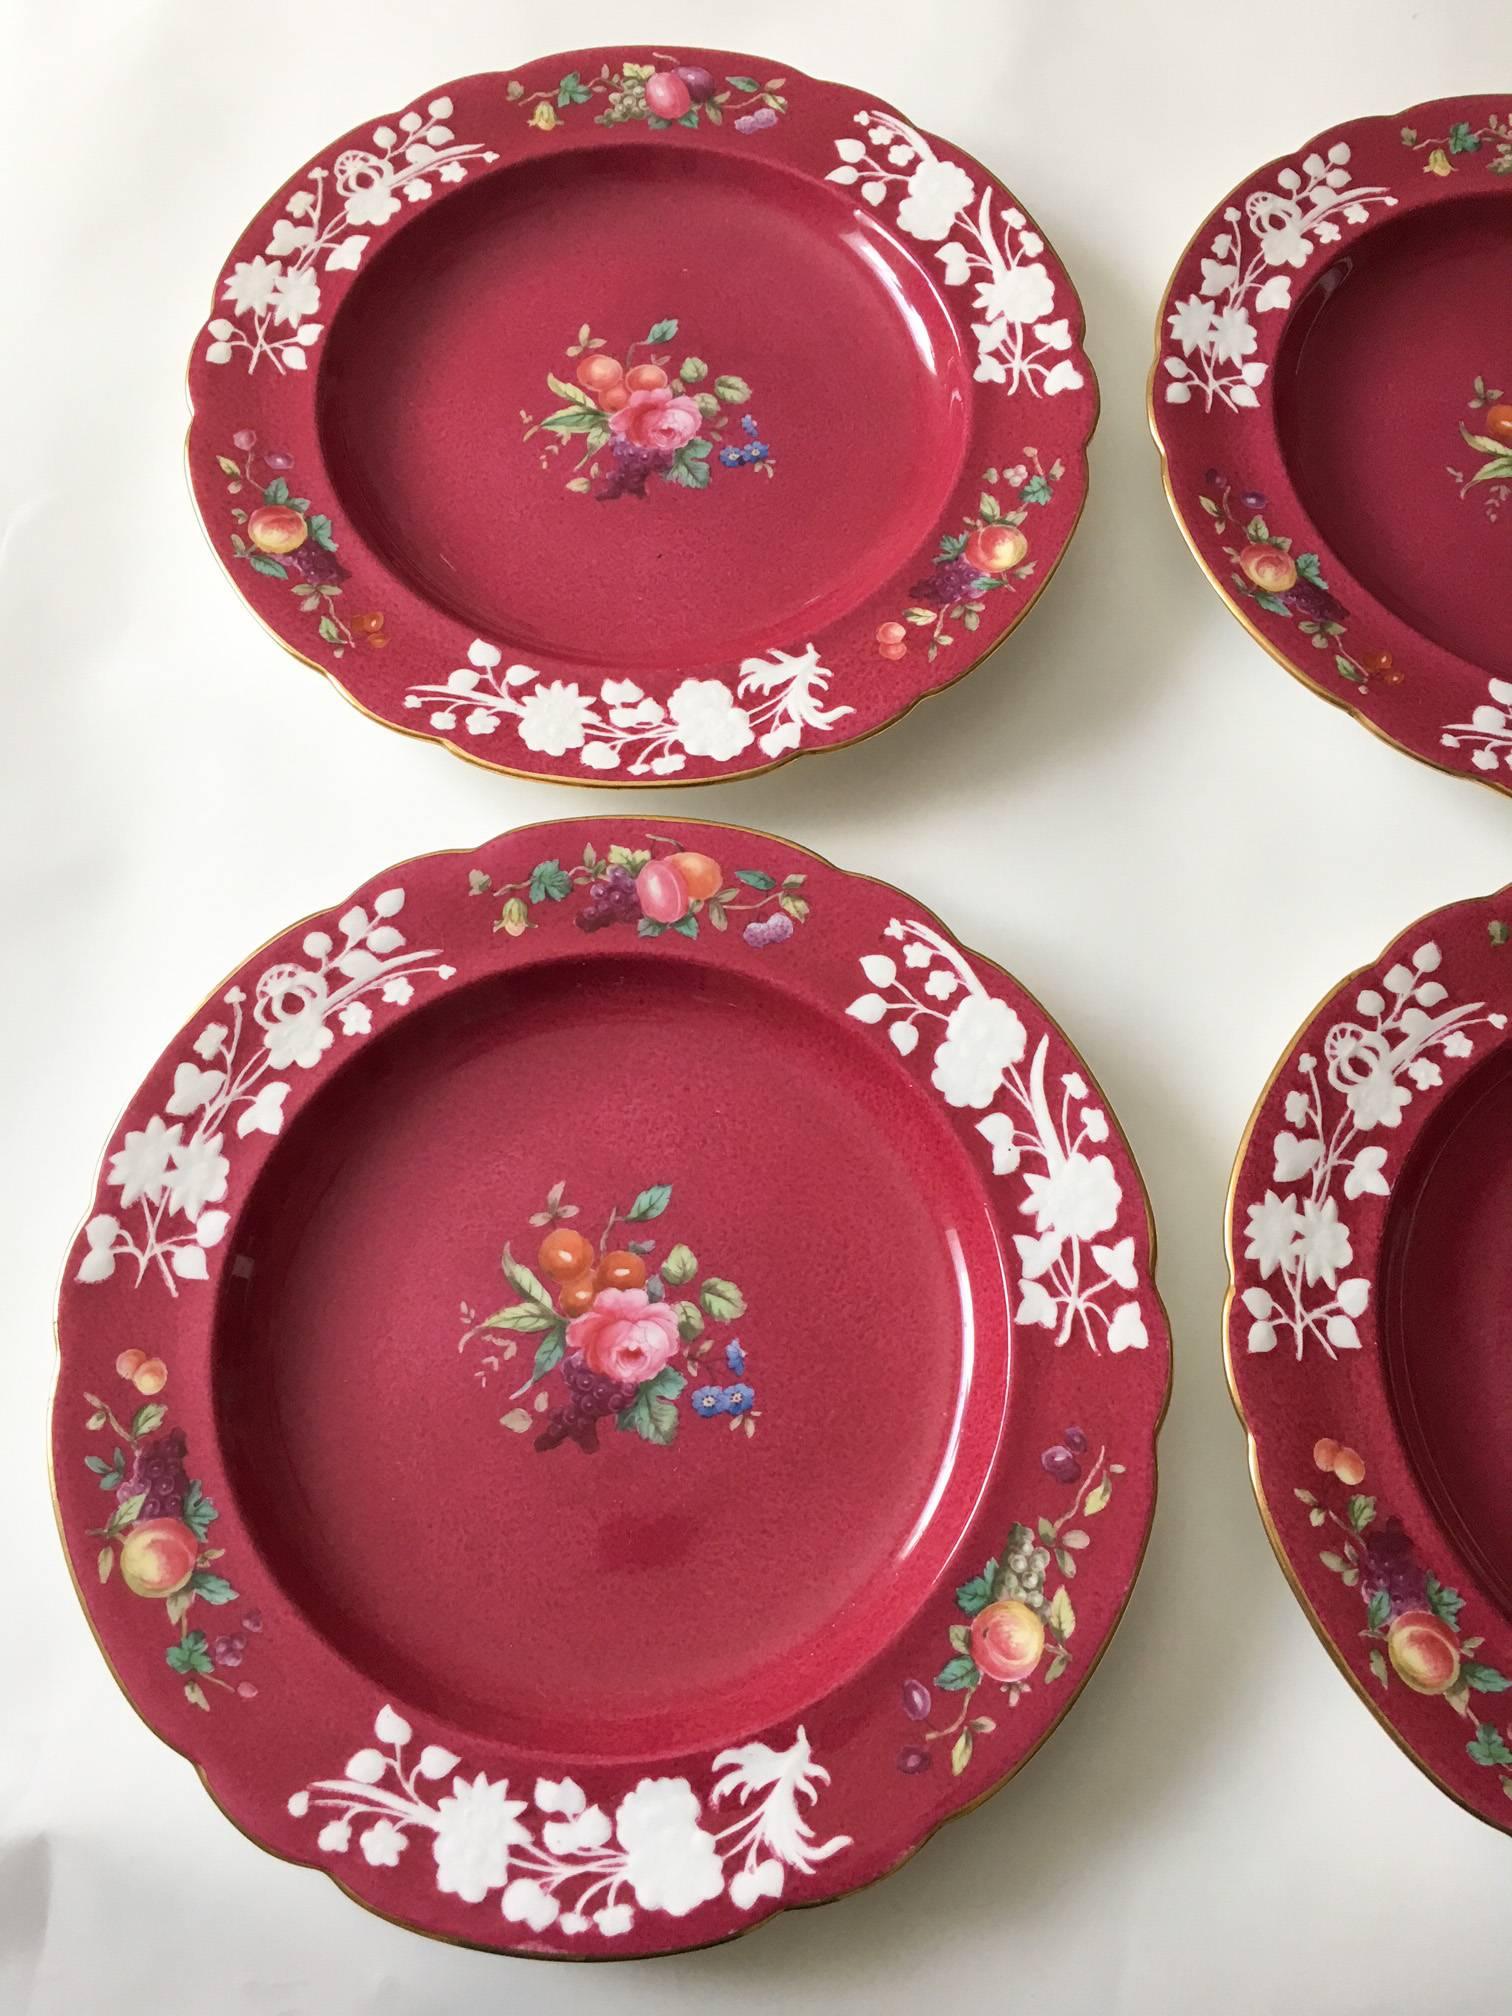 Offered is an exquisite set of six ruby red hand-painted dessert plates, marked in green underglaze by Spode, Copeland's China, England (1891-into the 20th century), with a red over glaze Tiffany & Co. New York mark. Each plate features a